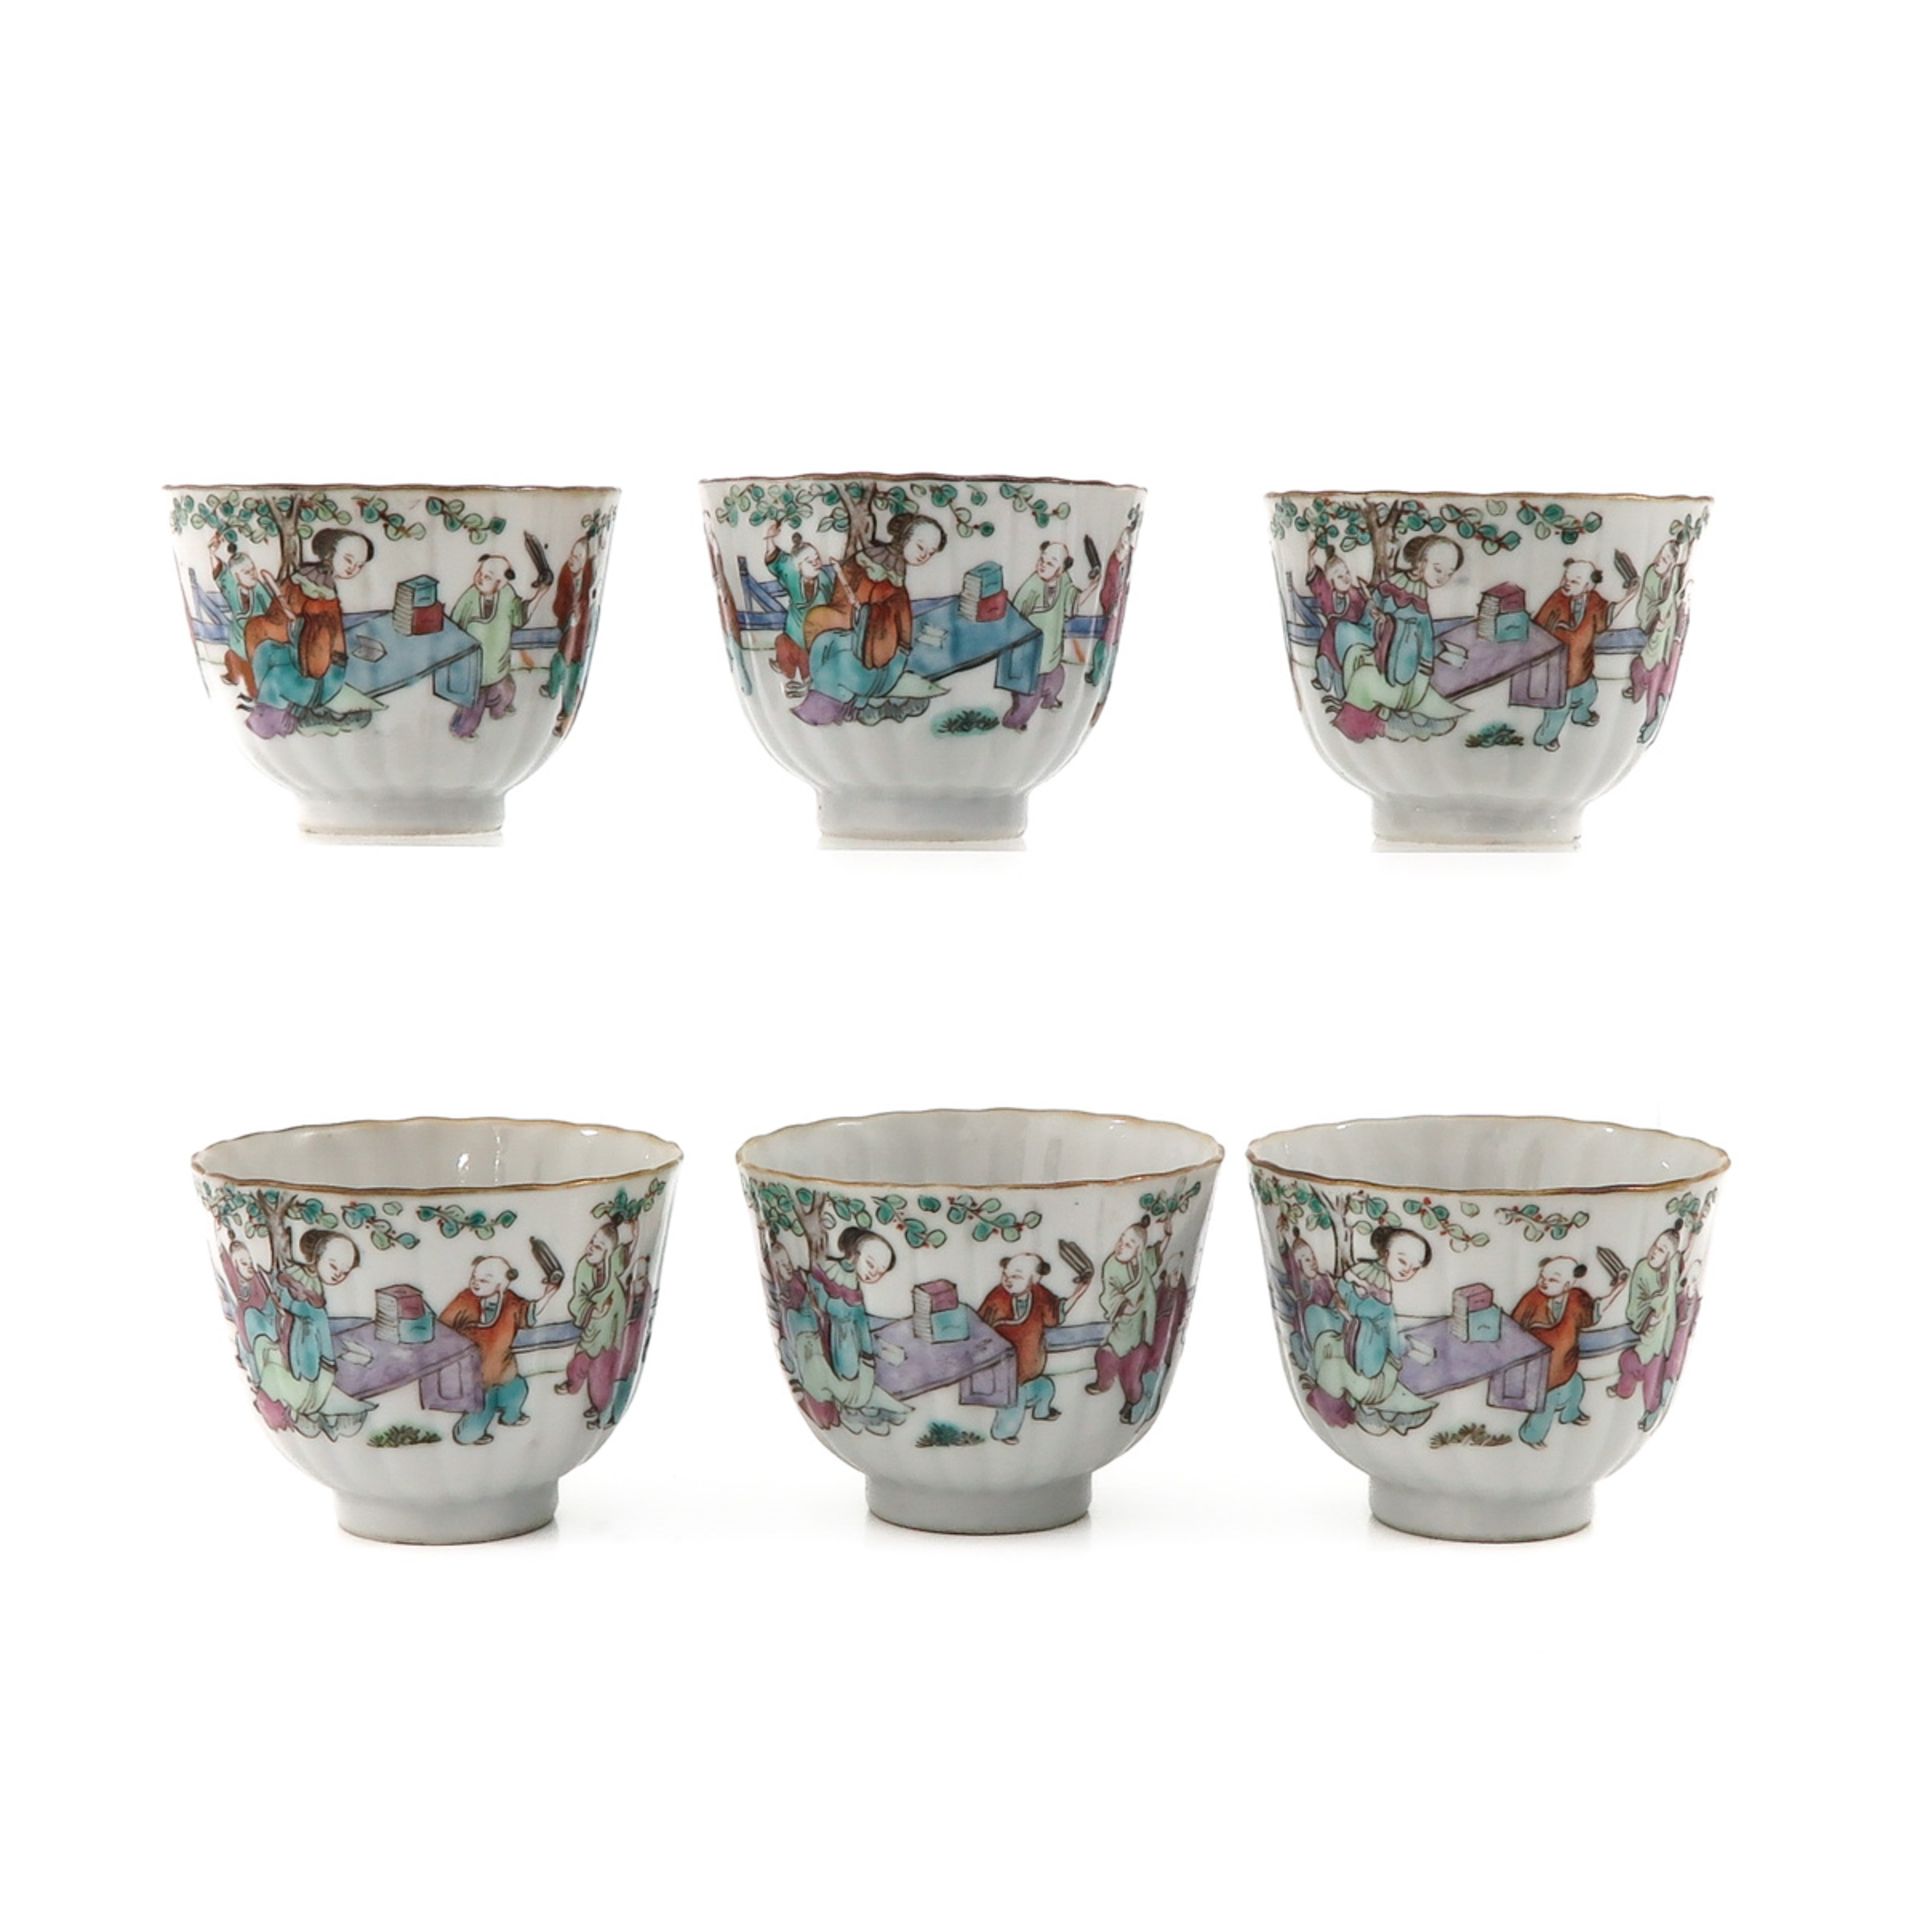 A Collection of 6 Famille Rose Cups